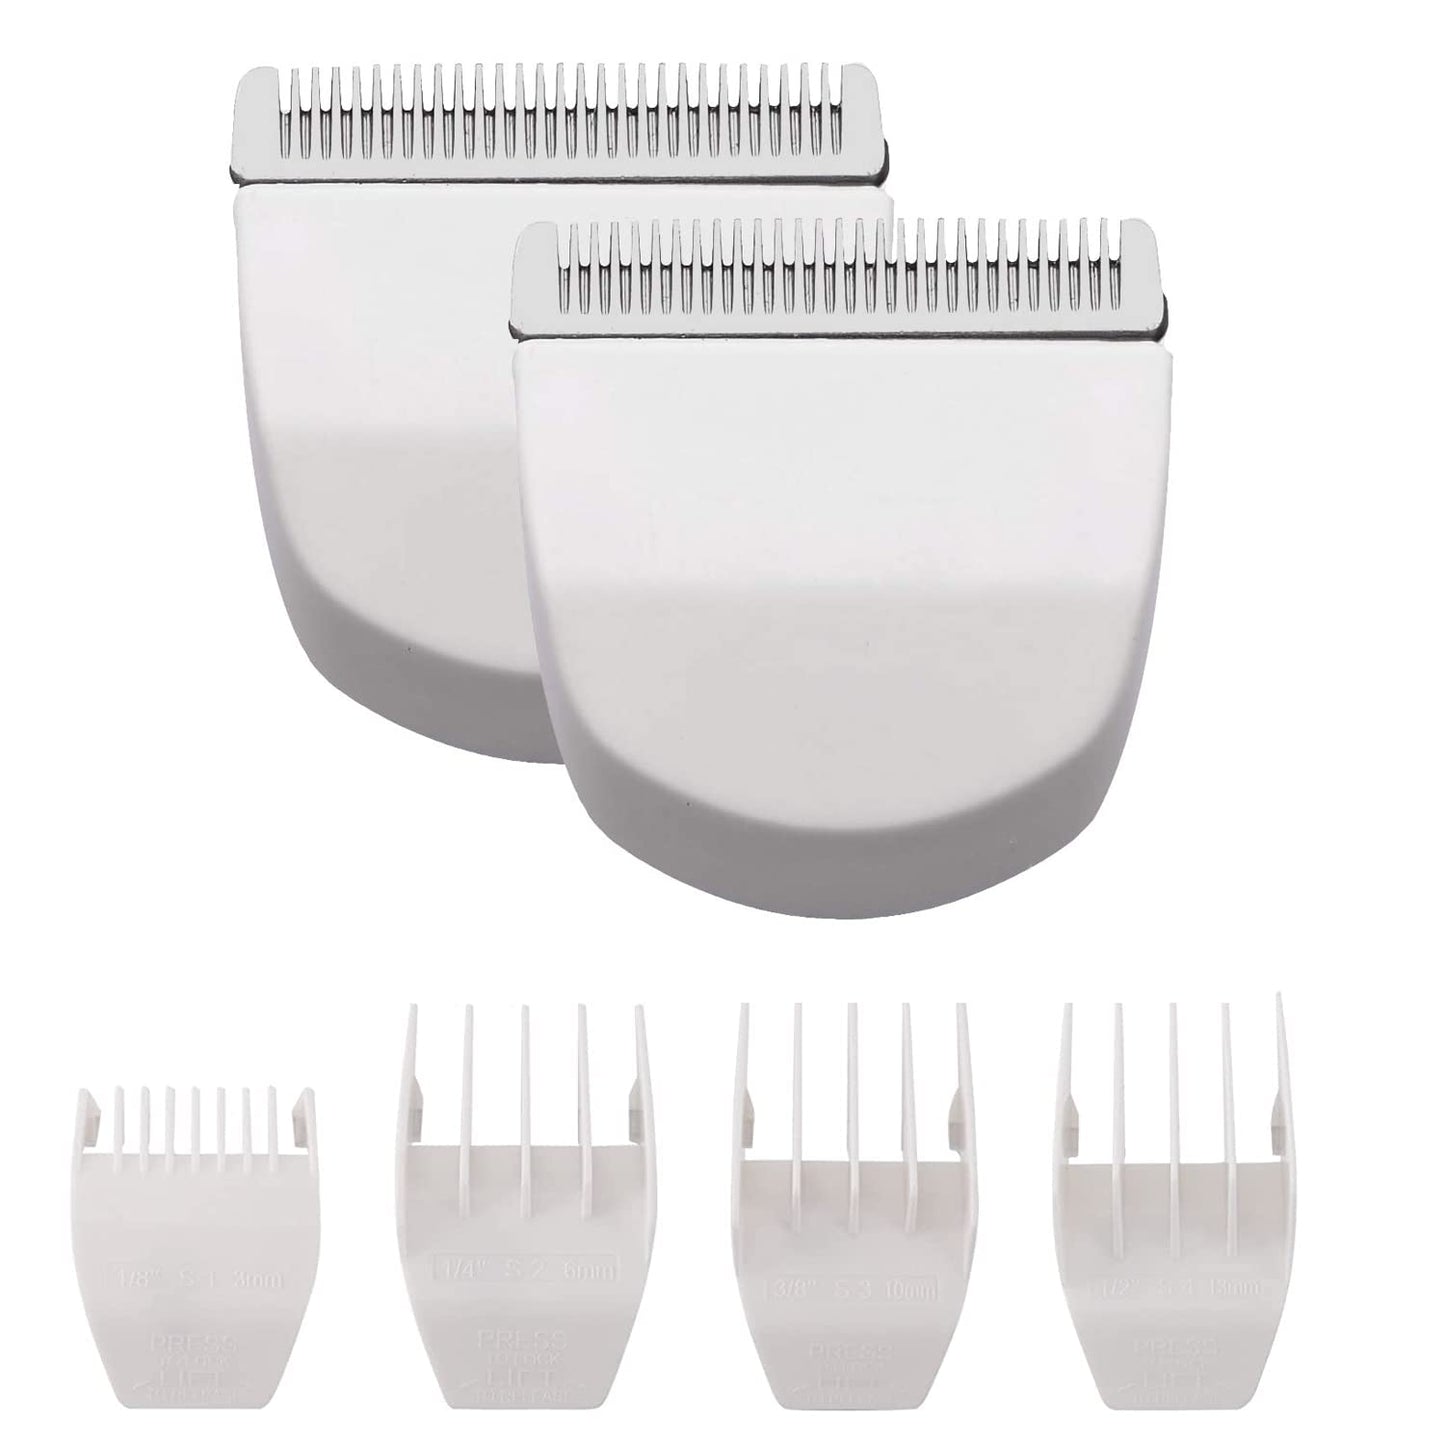 2 Pack White Professional Peanut Clipper/Trimmer Snap On Replacement Blades #2068-300 Fits Compatible with Professional Peanut Hair Clipper